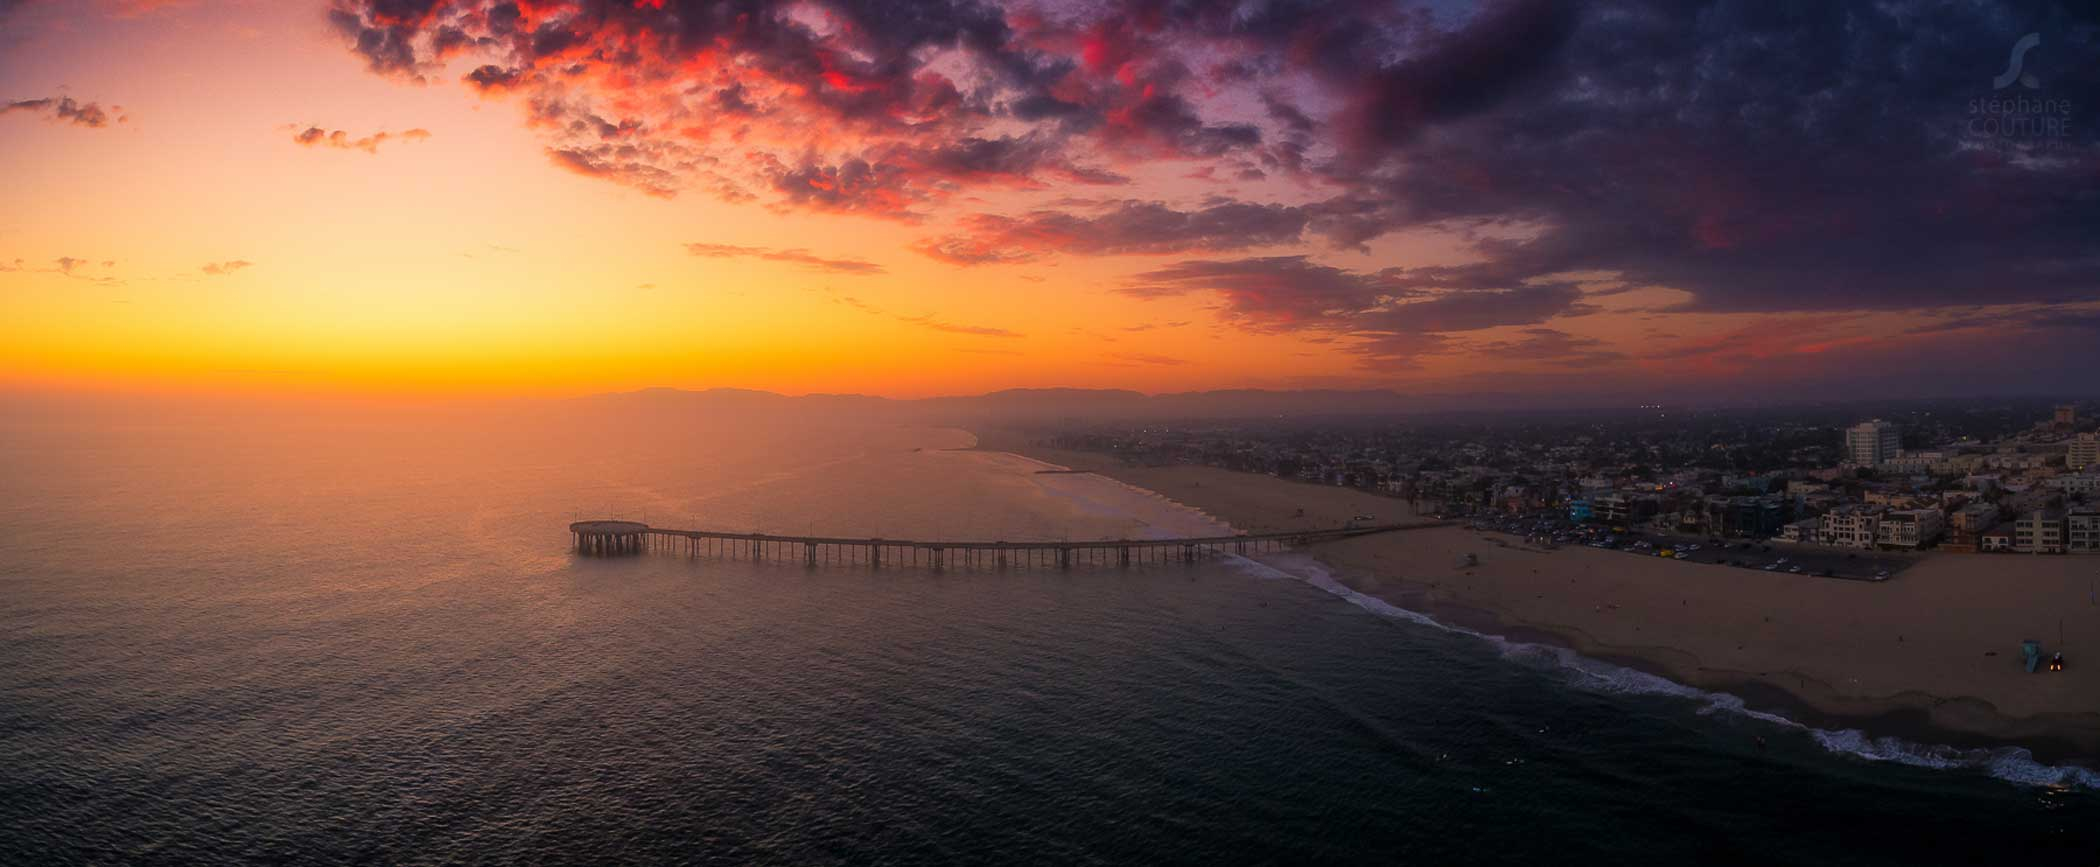 Sunset over Venice Pier in Los Angeles.